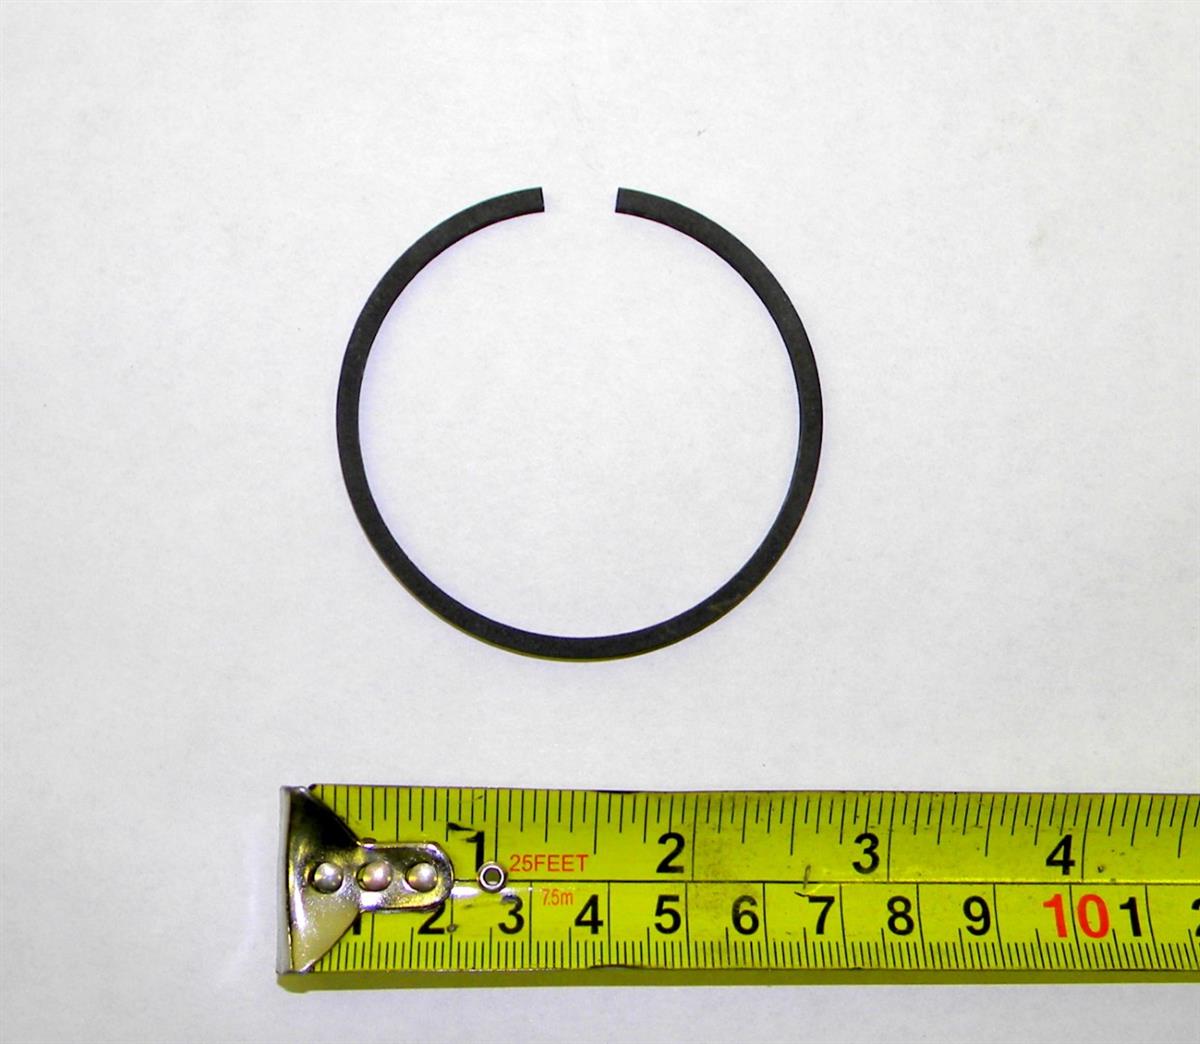 COM-5195 | 5330-00-899-6726 Ring Seal for Exhaust Manifold for M35A2 Series with Multi-Fuel Engine. NOS.  (2).JPG